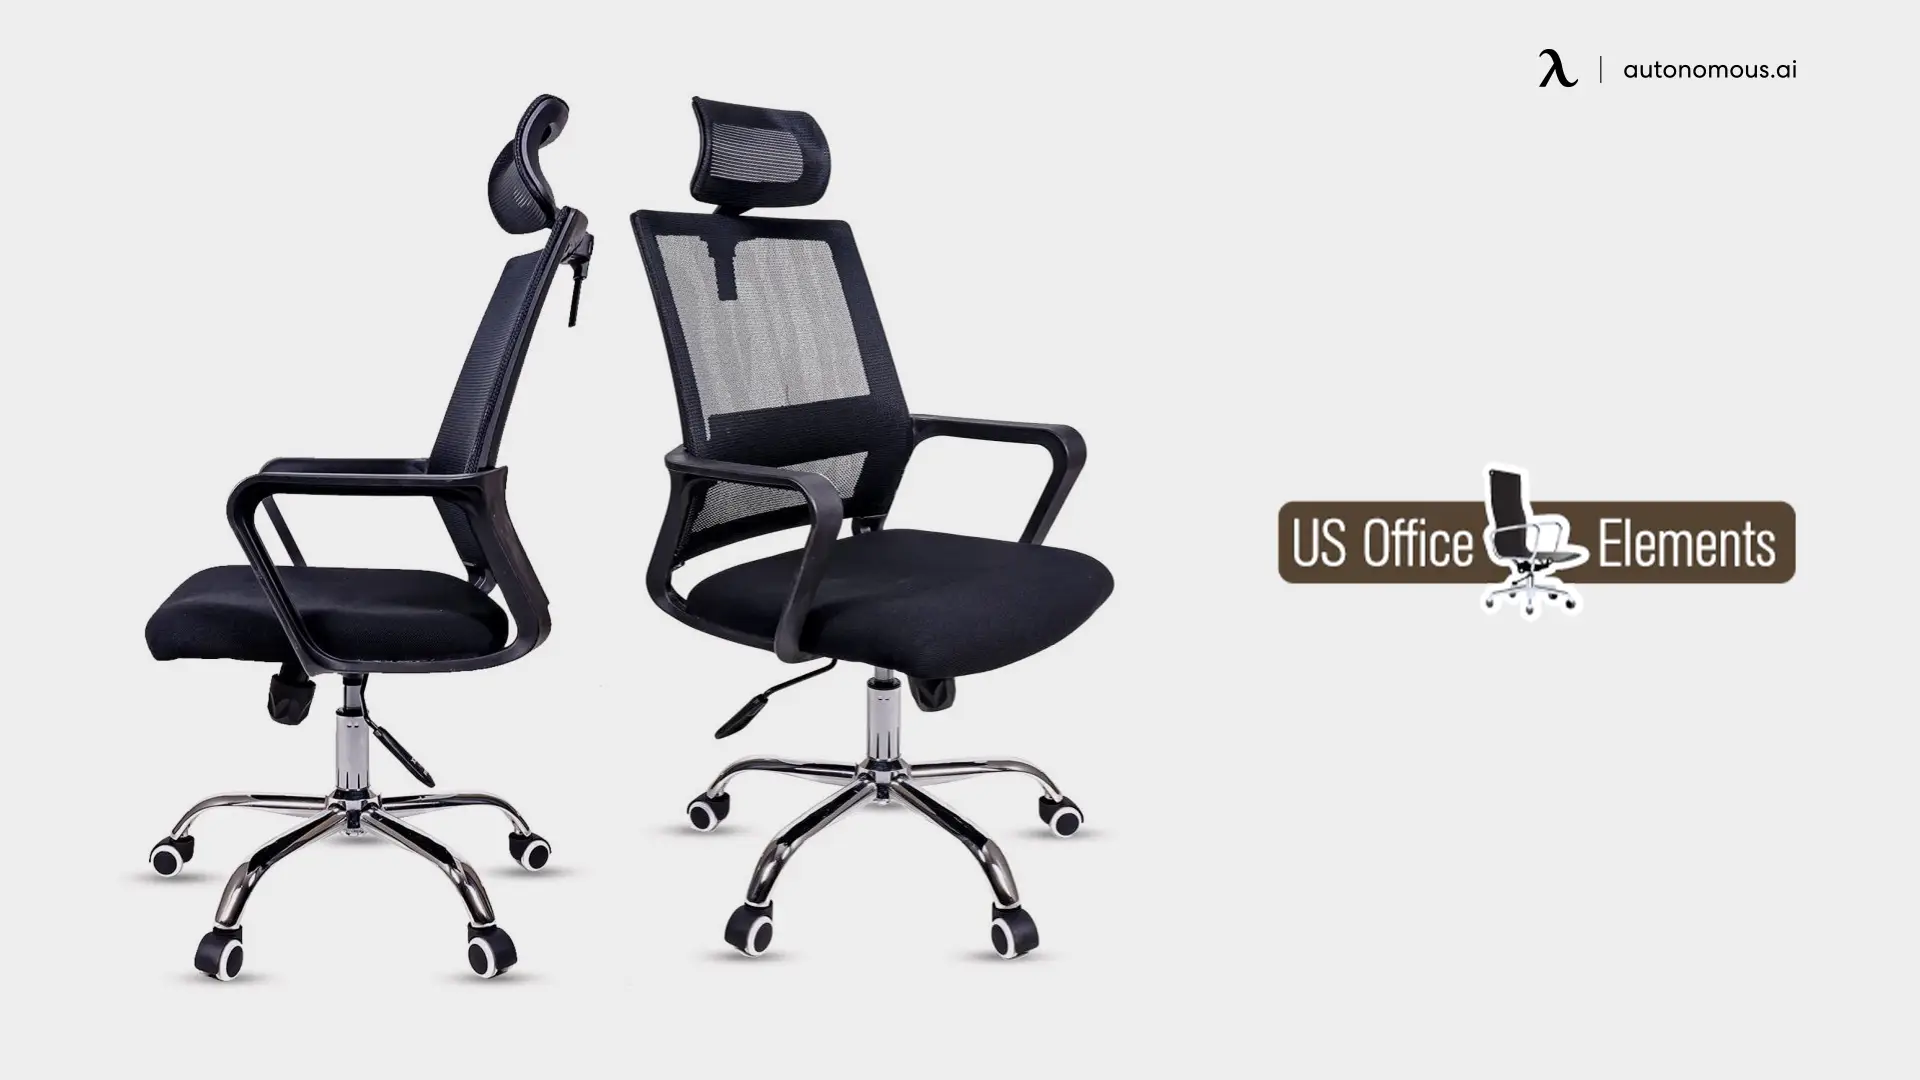 US Office Elements office chair supplier